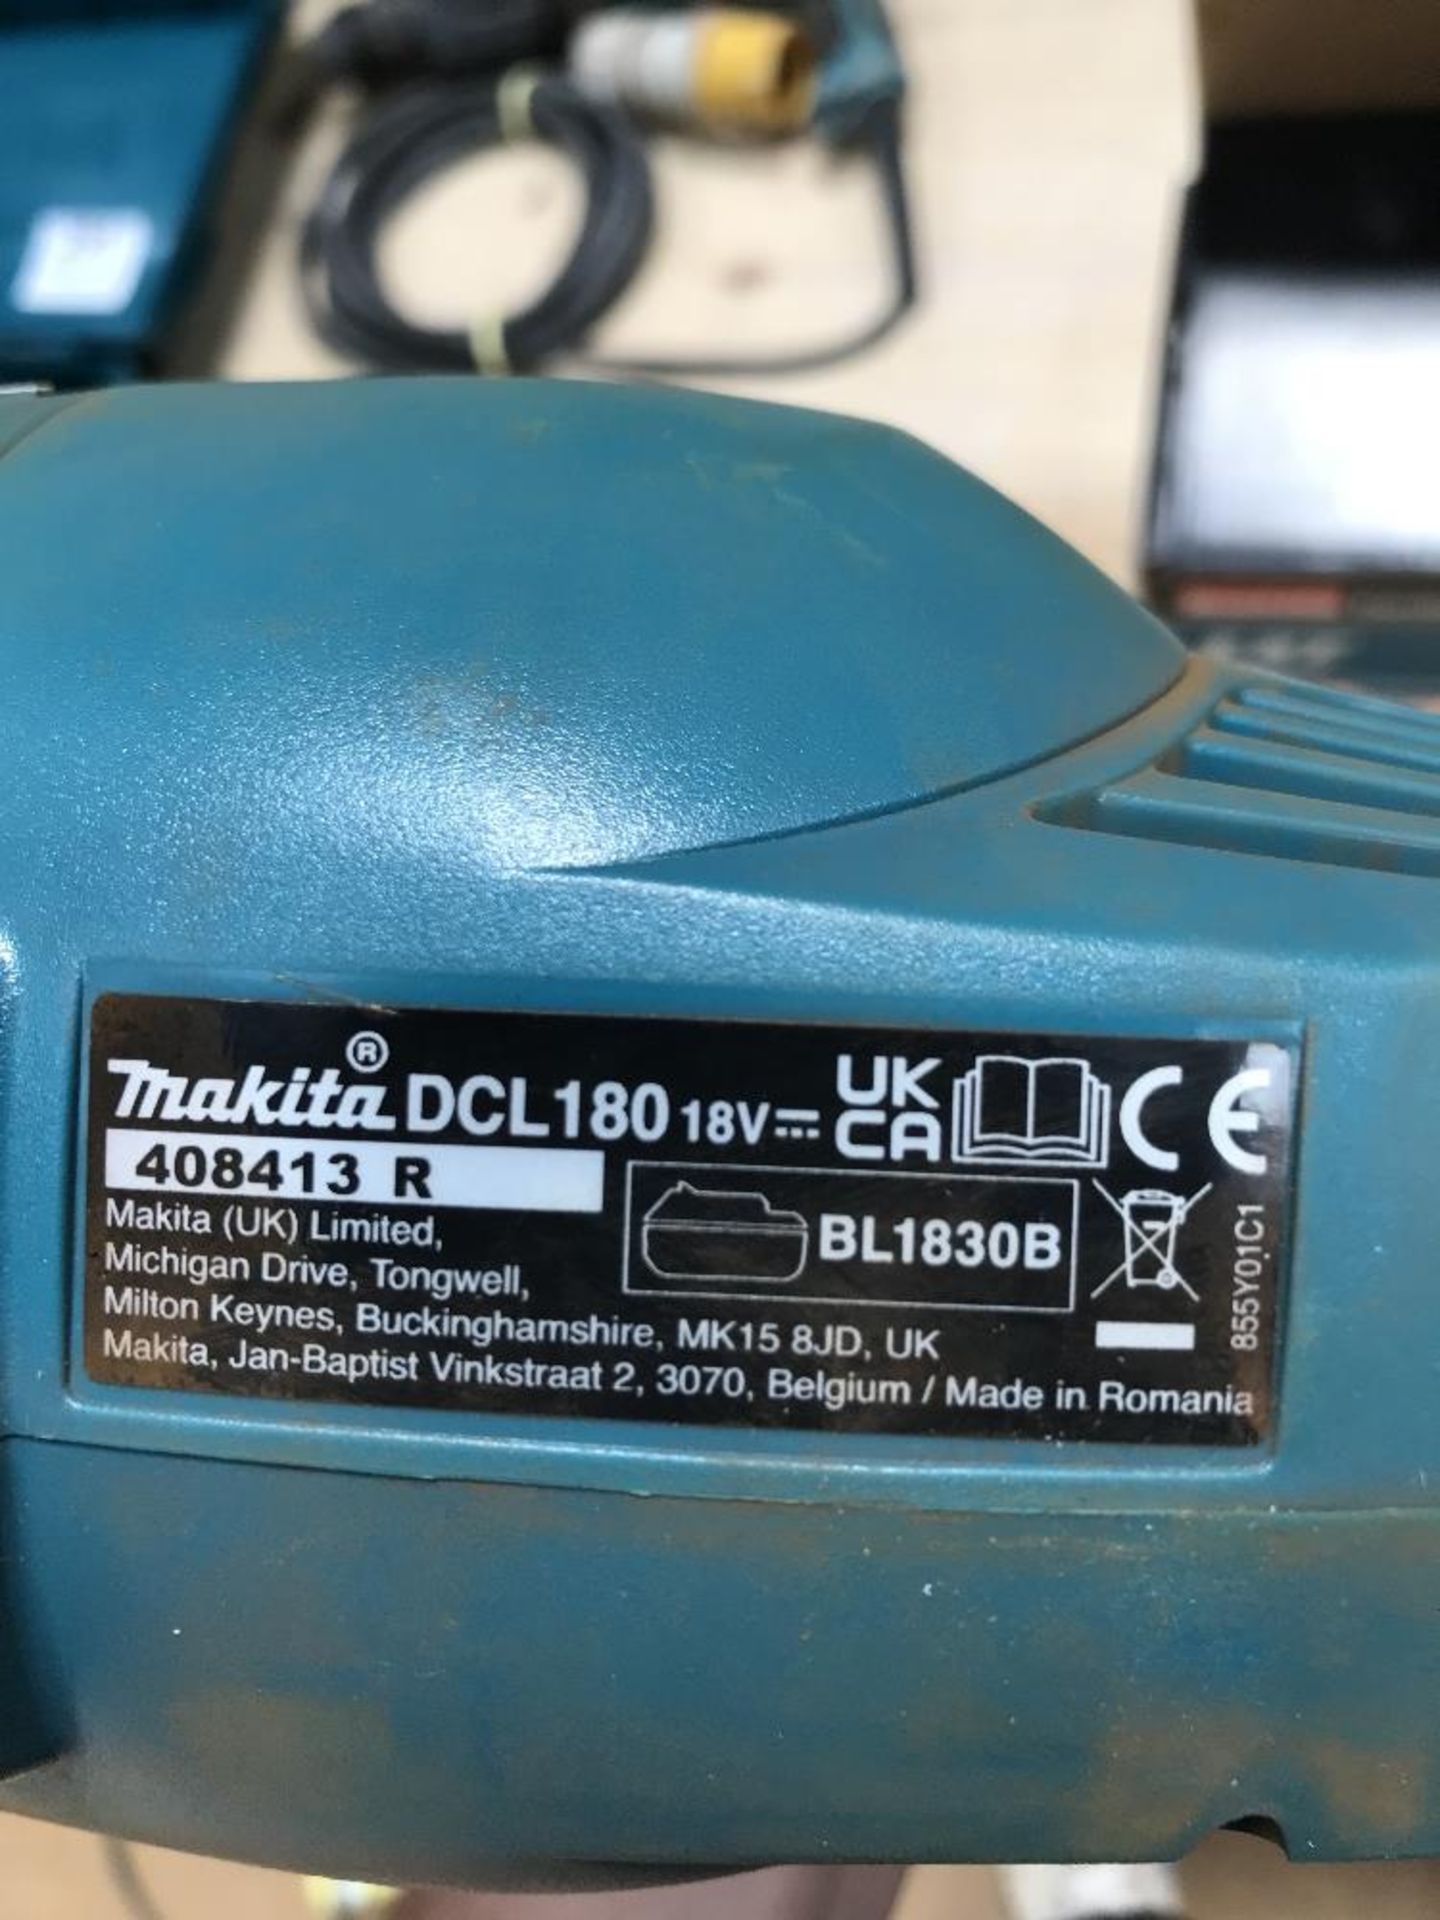 Makita DCL180Z Cordless Cleaner please note no battery or charger - Image 4 of 5